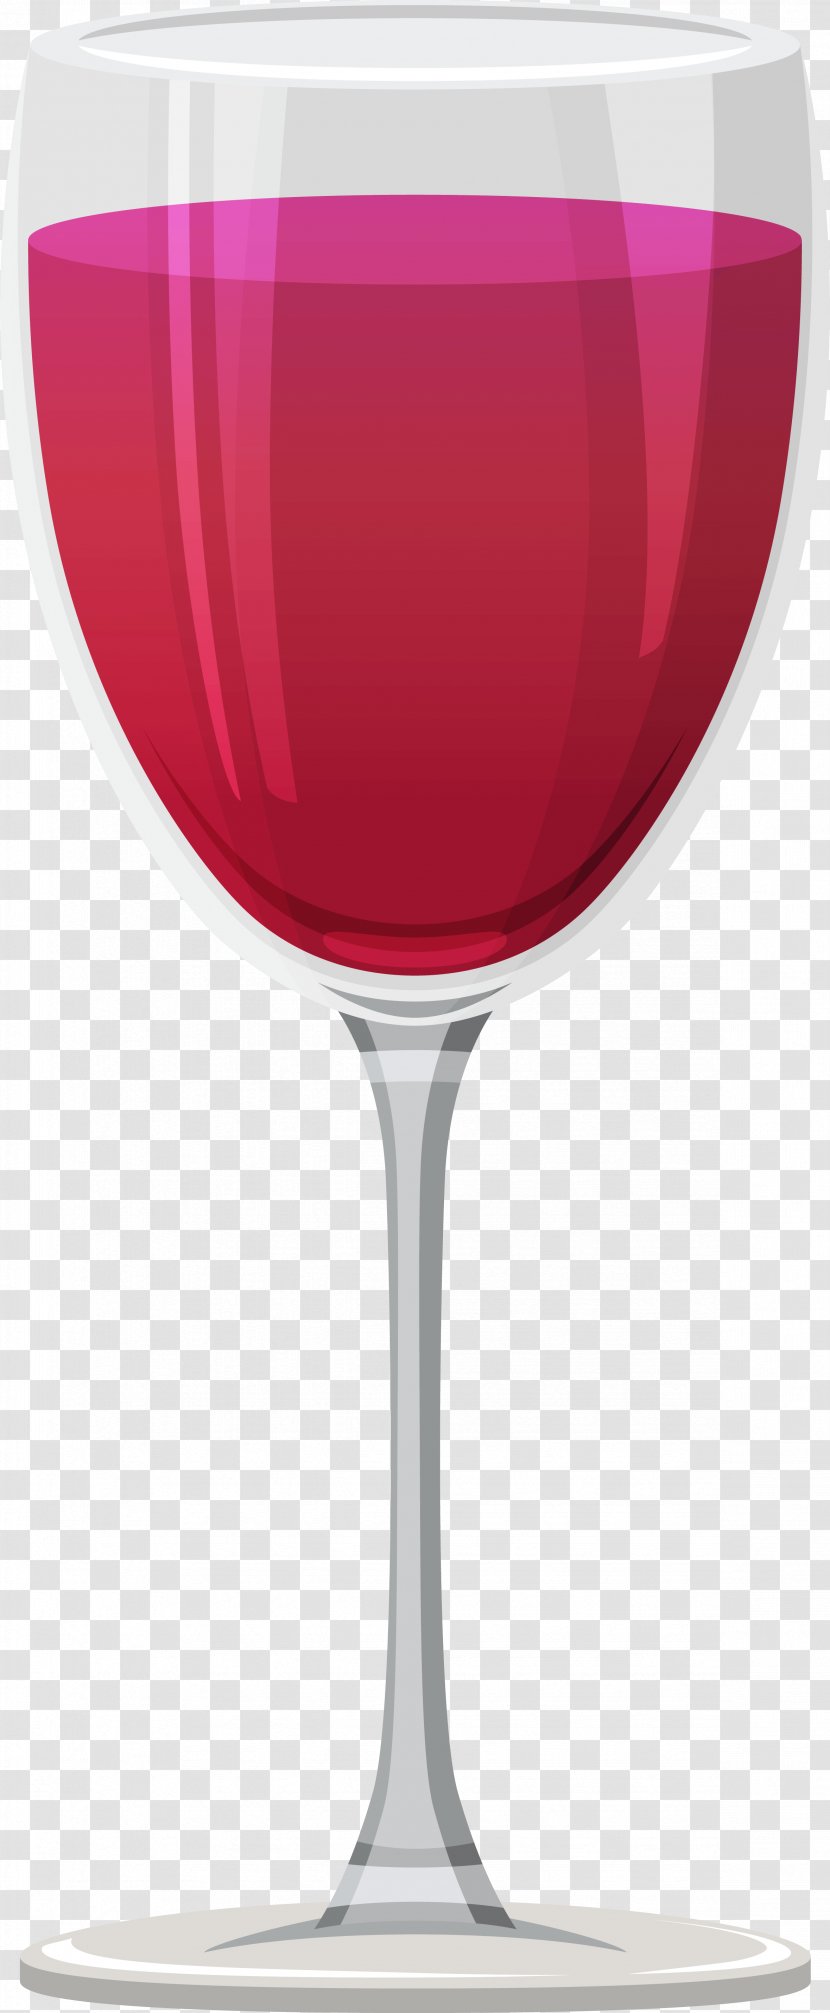 Red Wine Cocktail Glass Clip Art - Image Transparent PNG